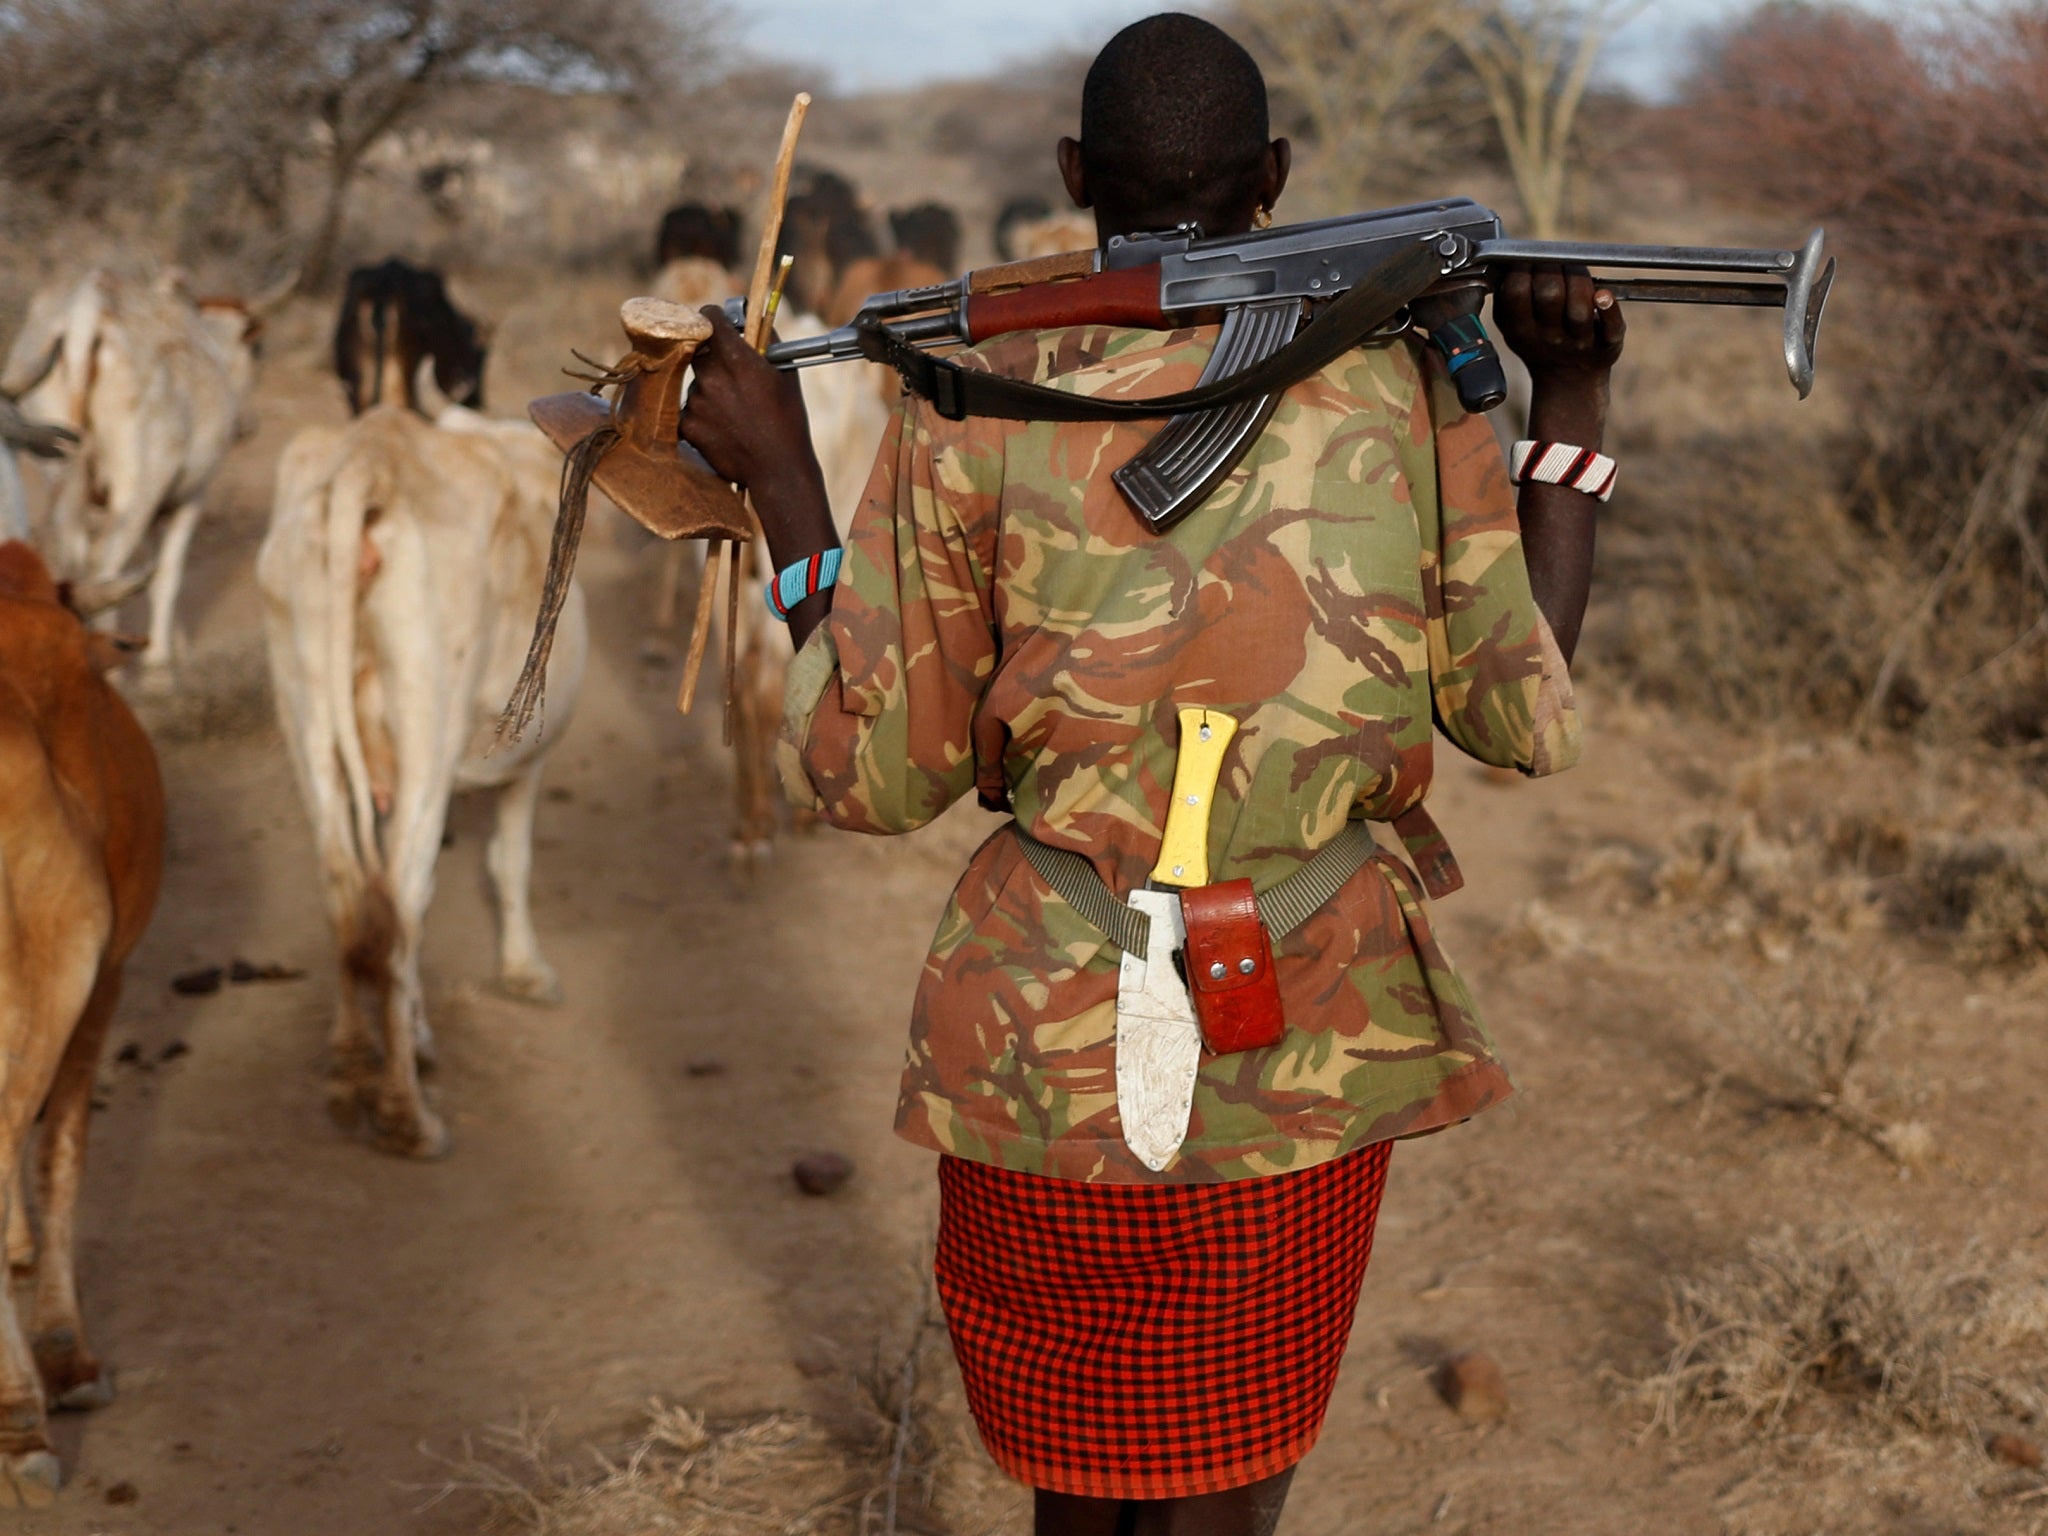 A Turkana tribesman carries a gun in order to protect his cattle as illegal grazing rises in areas hit by drought